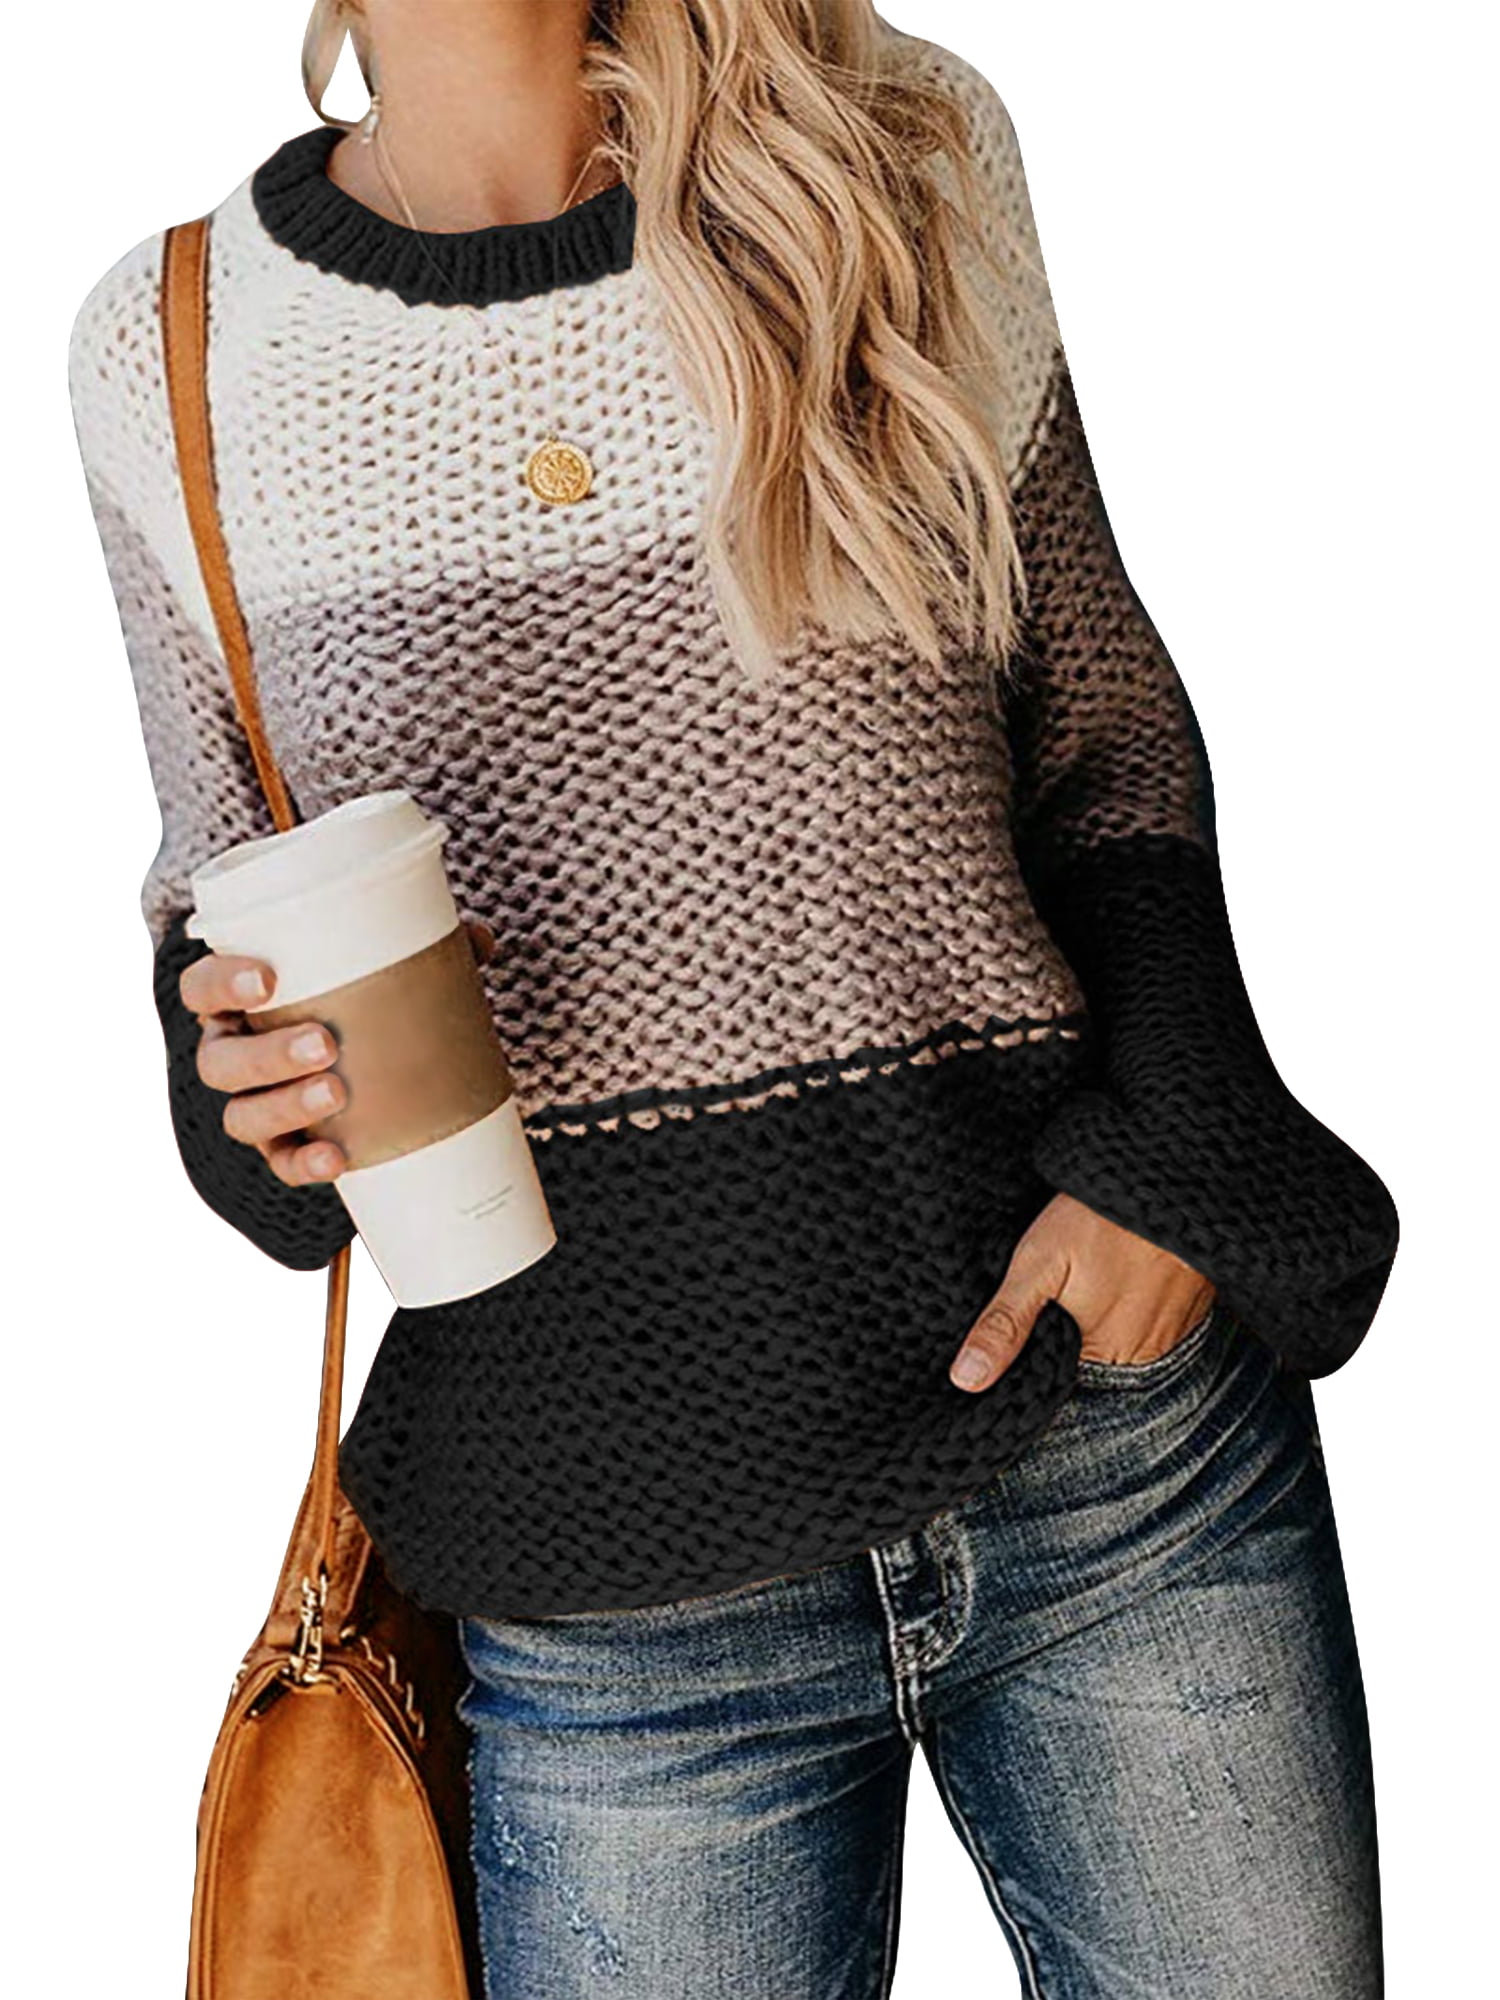 Stylish Women Long Sleeve Loose Knitted Sweater Ladies Casual Jumper Tops Blouse 